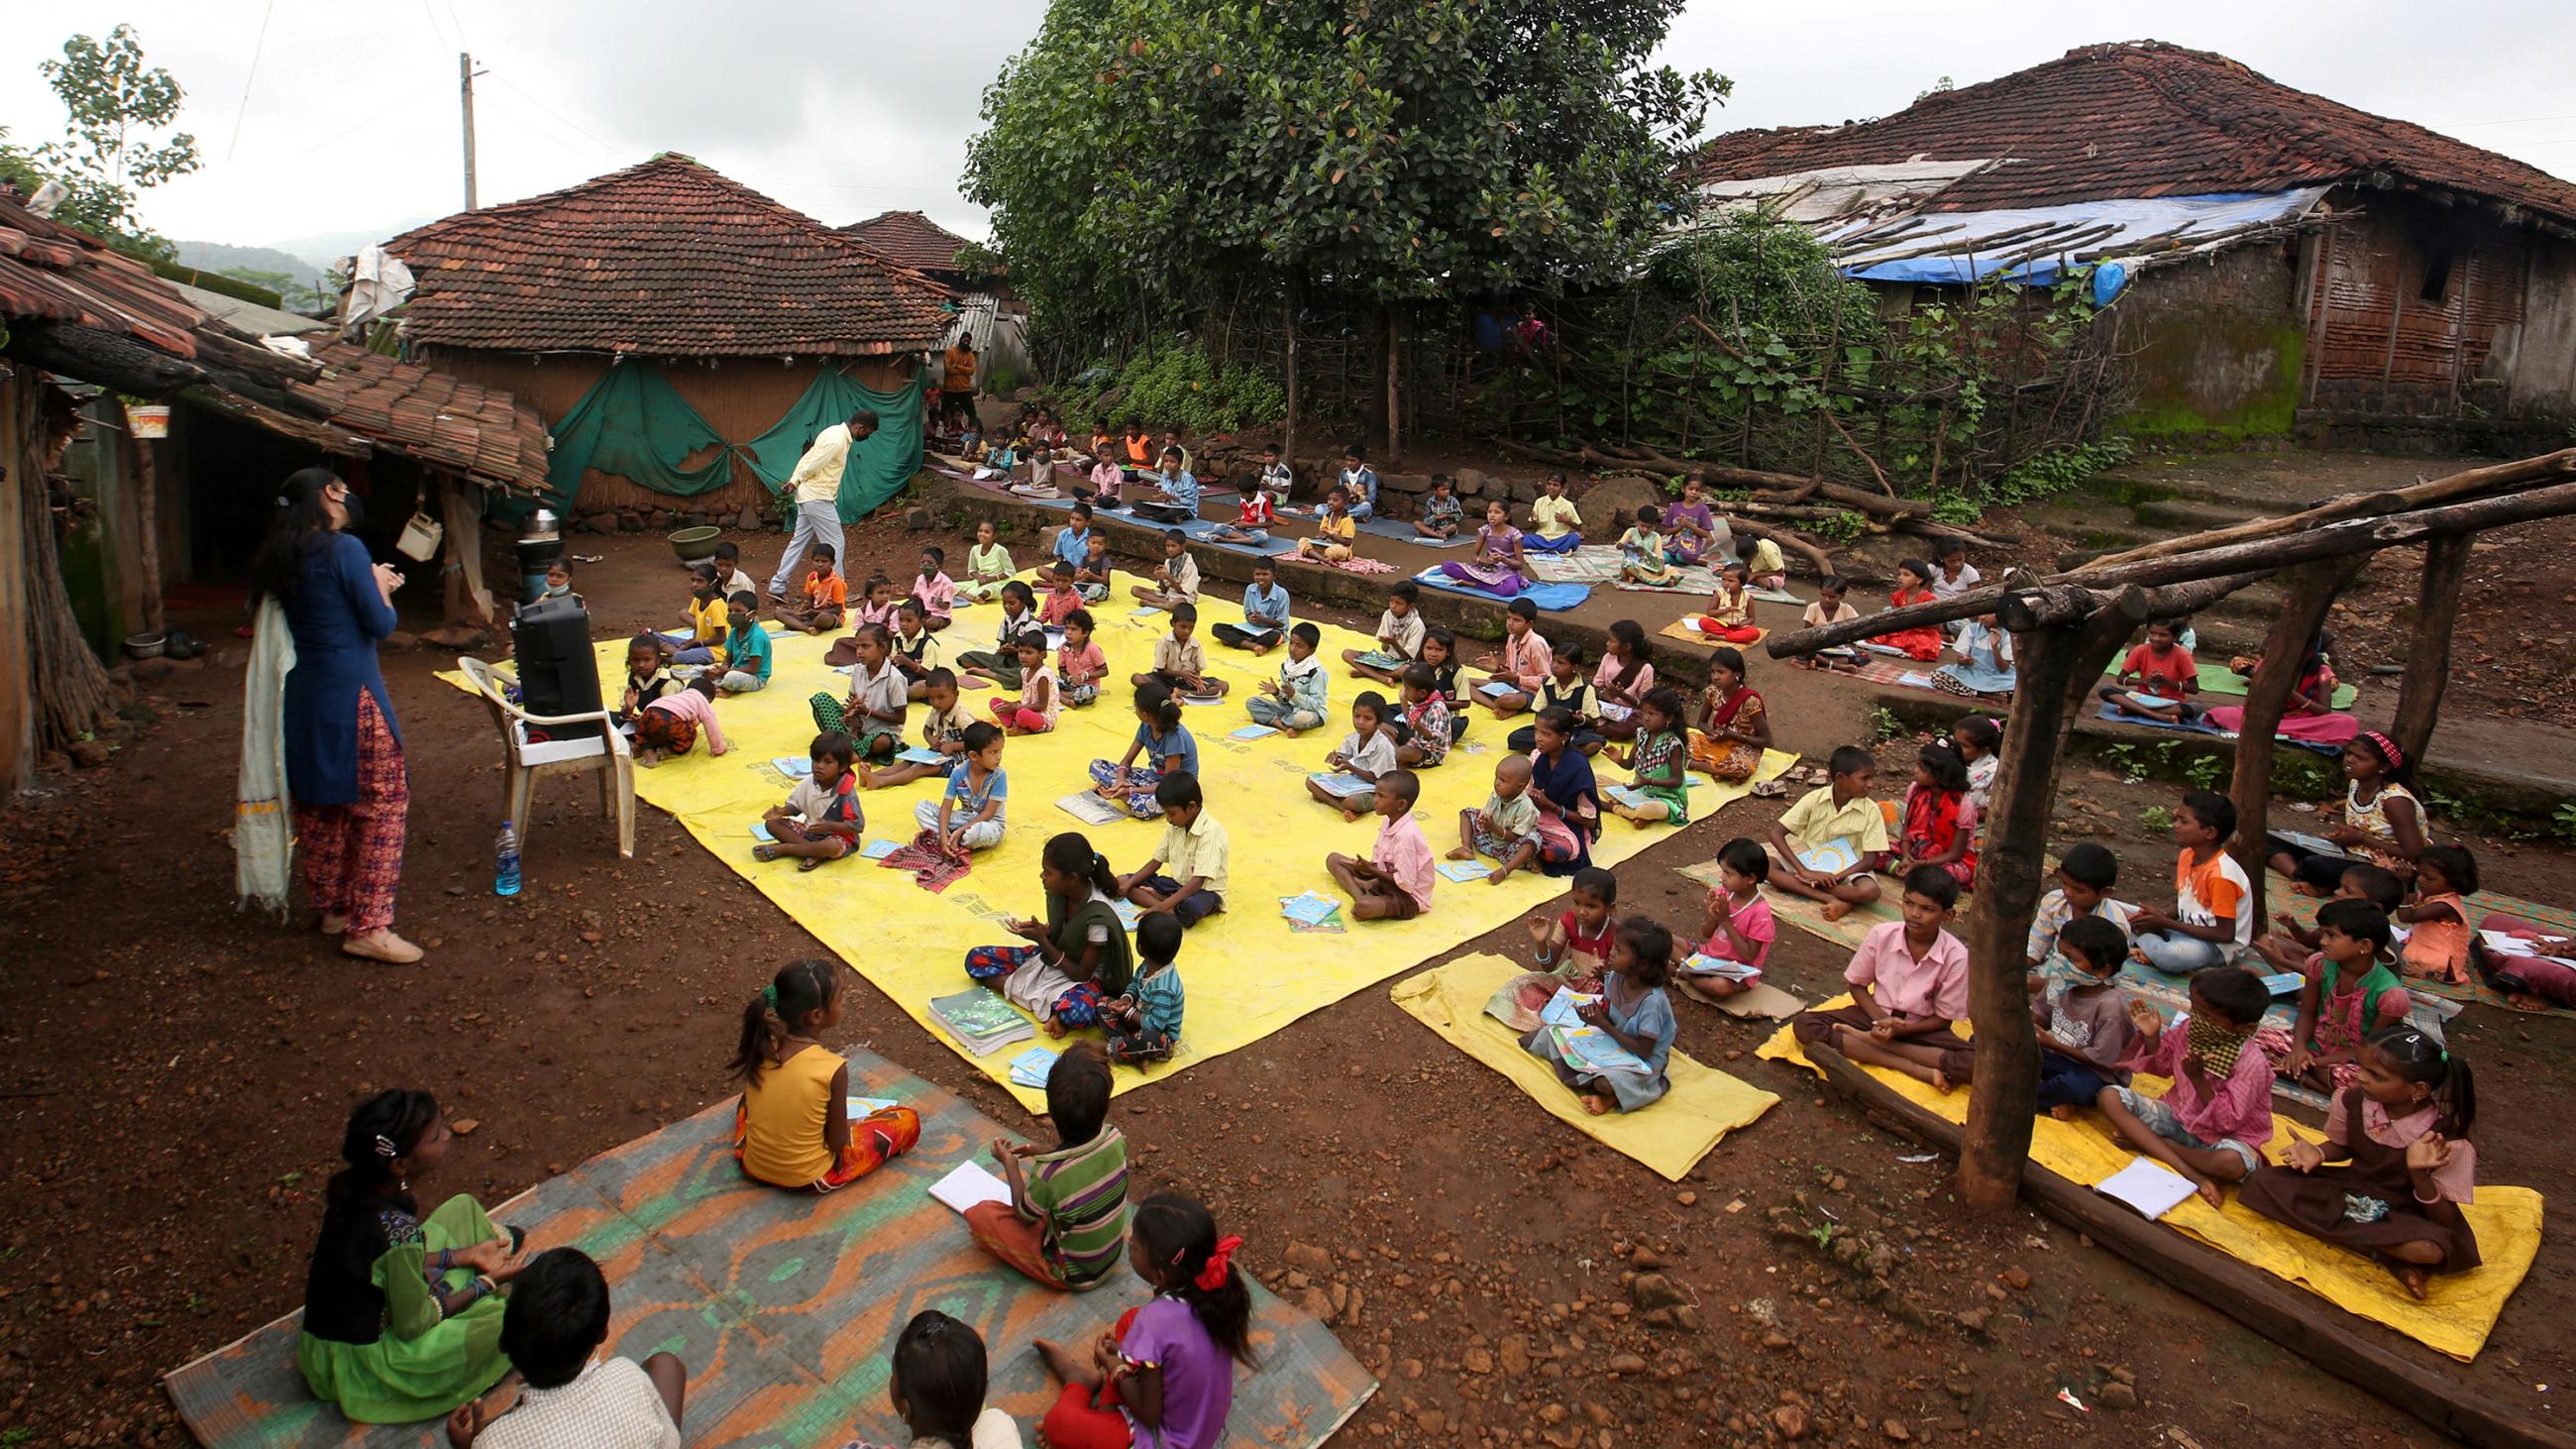 Picture shows an outdoor area with a huge group of kids seated at a safe distance from one another. 